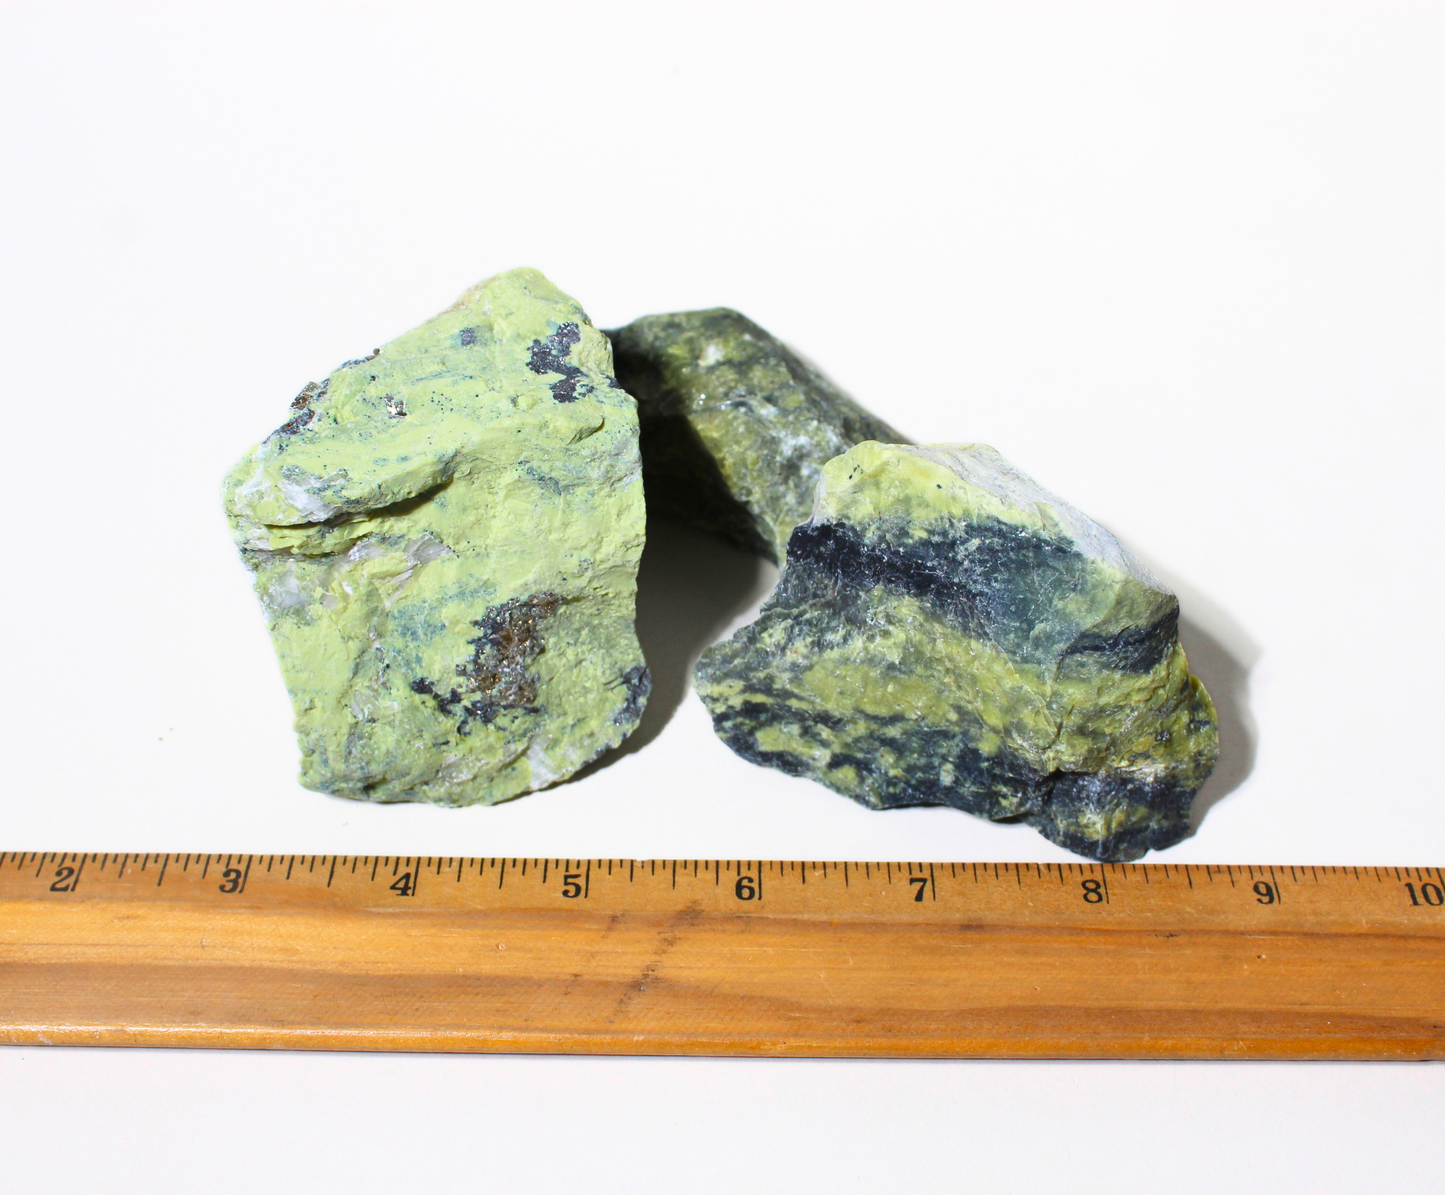 Serpentine | Rough Rocks from Peru | 2" - 3" Raw Crystals for Collecting